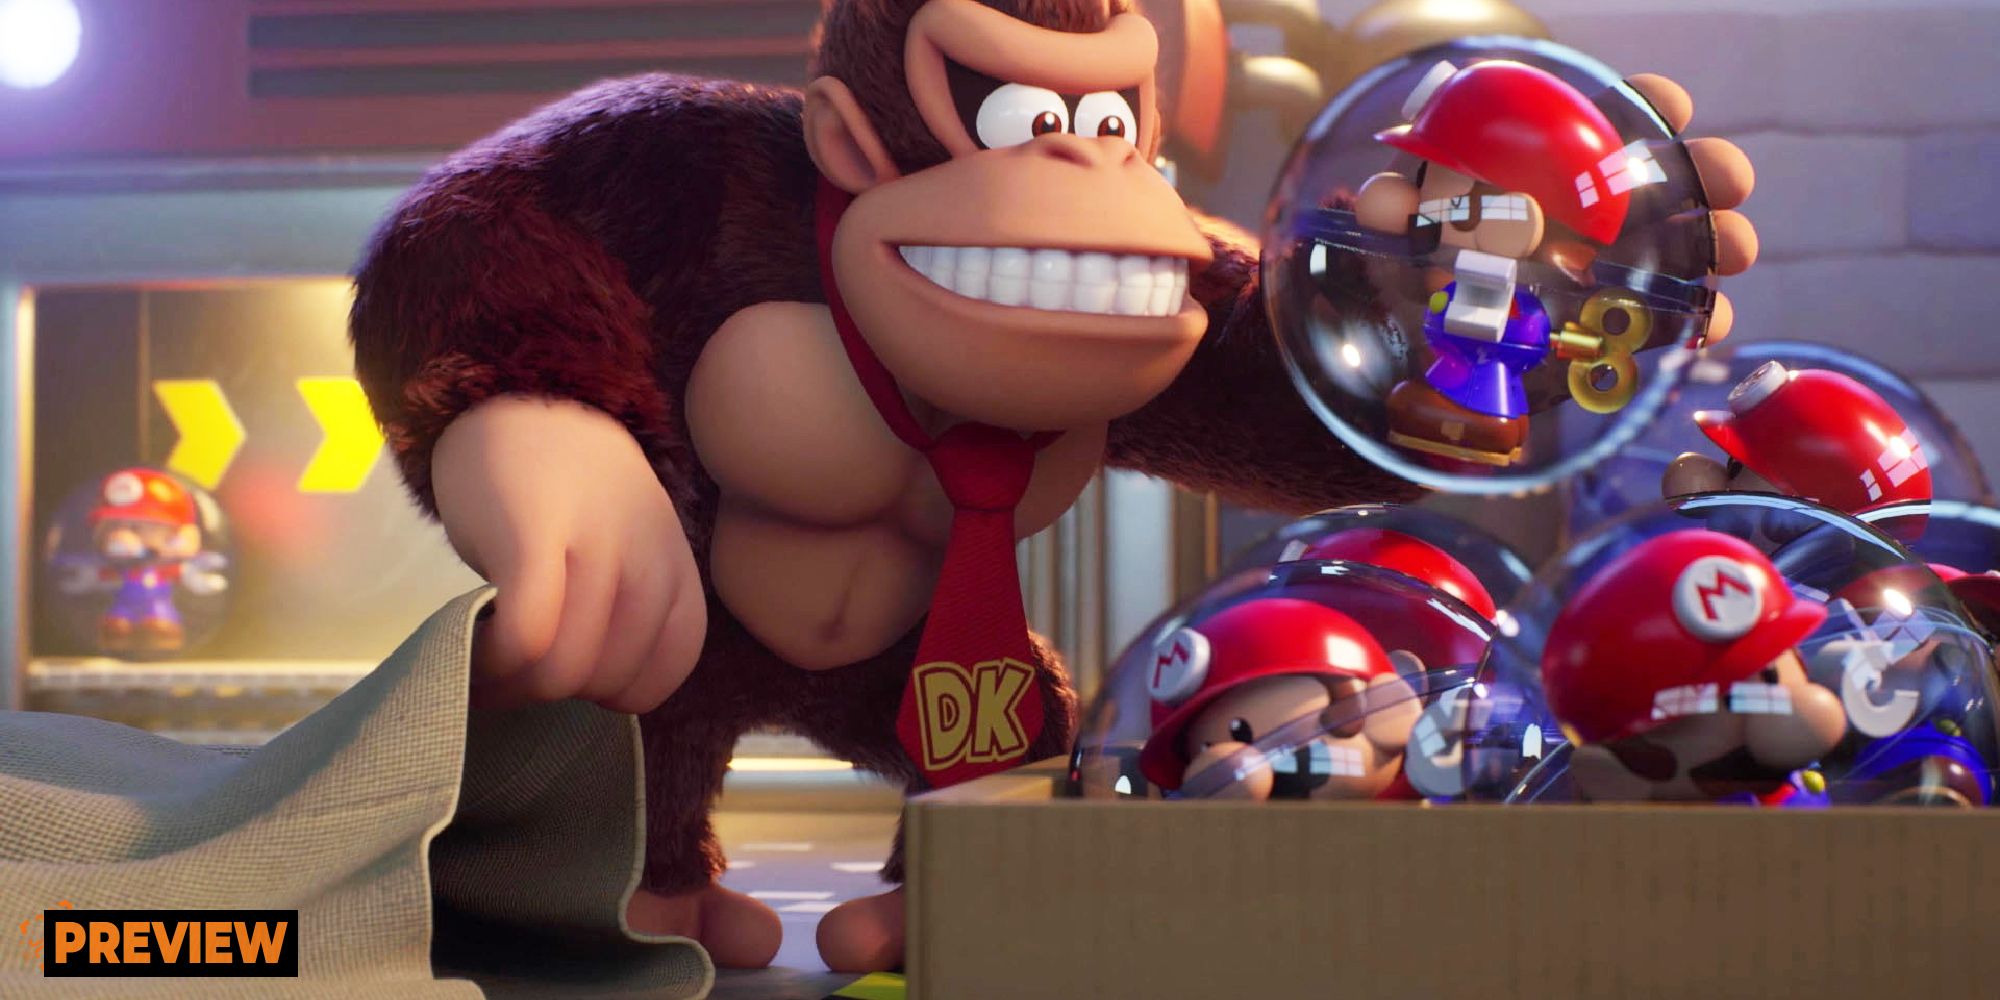 Mario vs Donkey Kong preview card with Donkey Kong holding a Mario toy